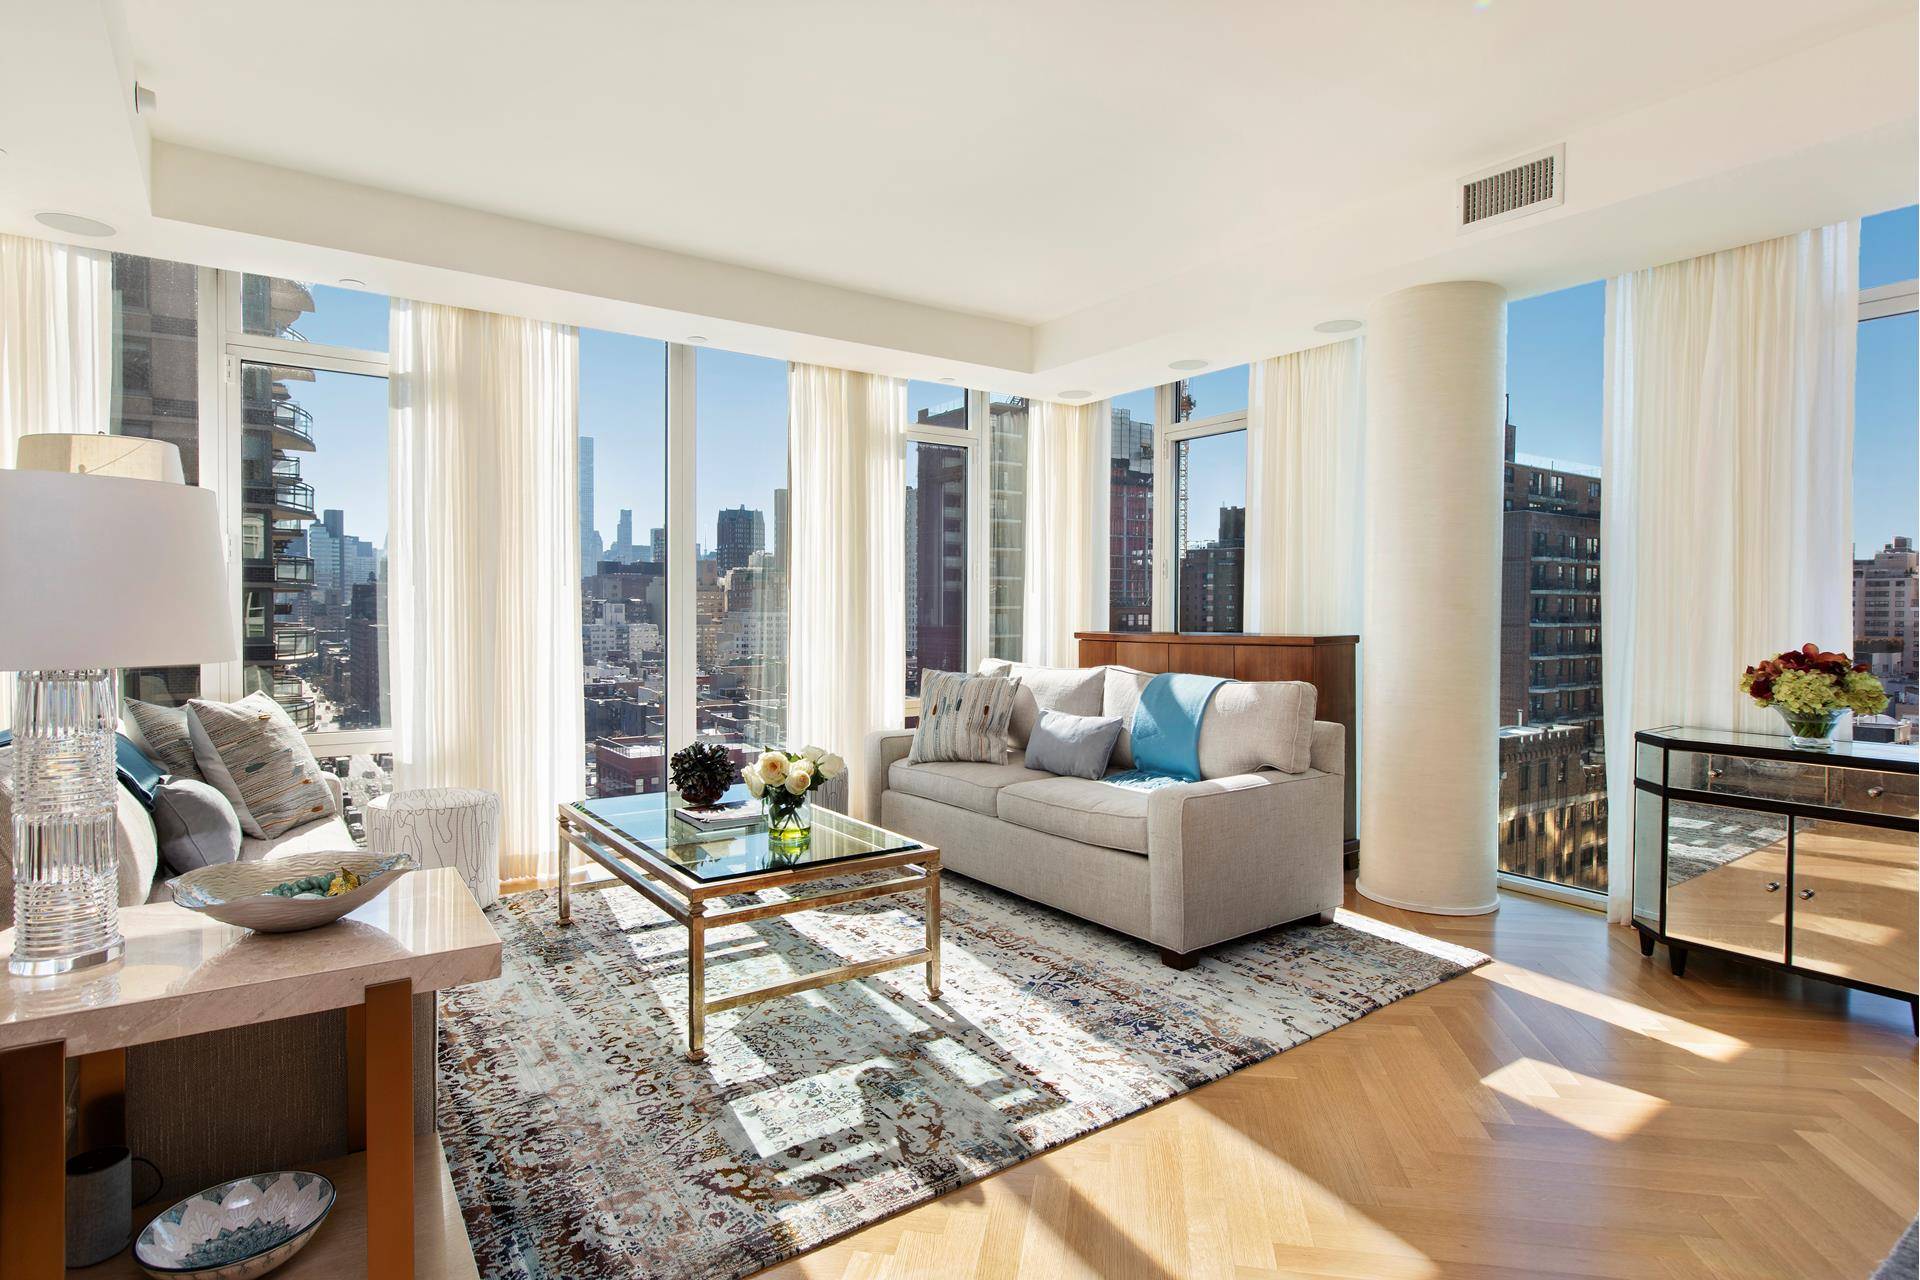 Enjoy the BEST OF THE UPPER EAST SIDE here in this premier, turnkey residence !